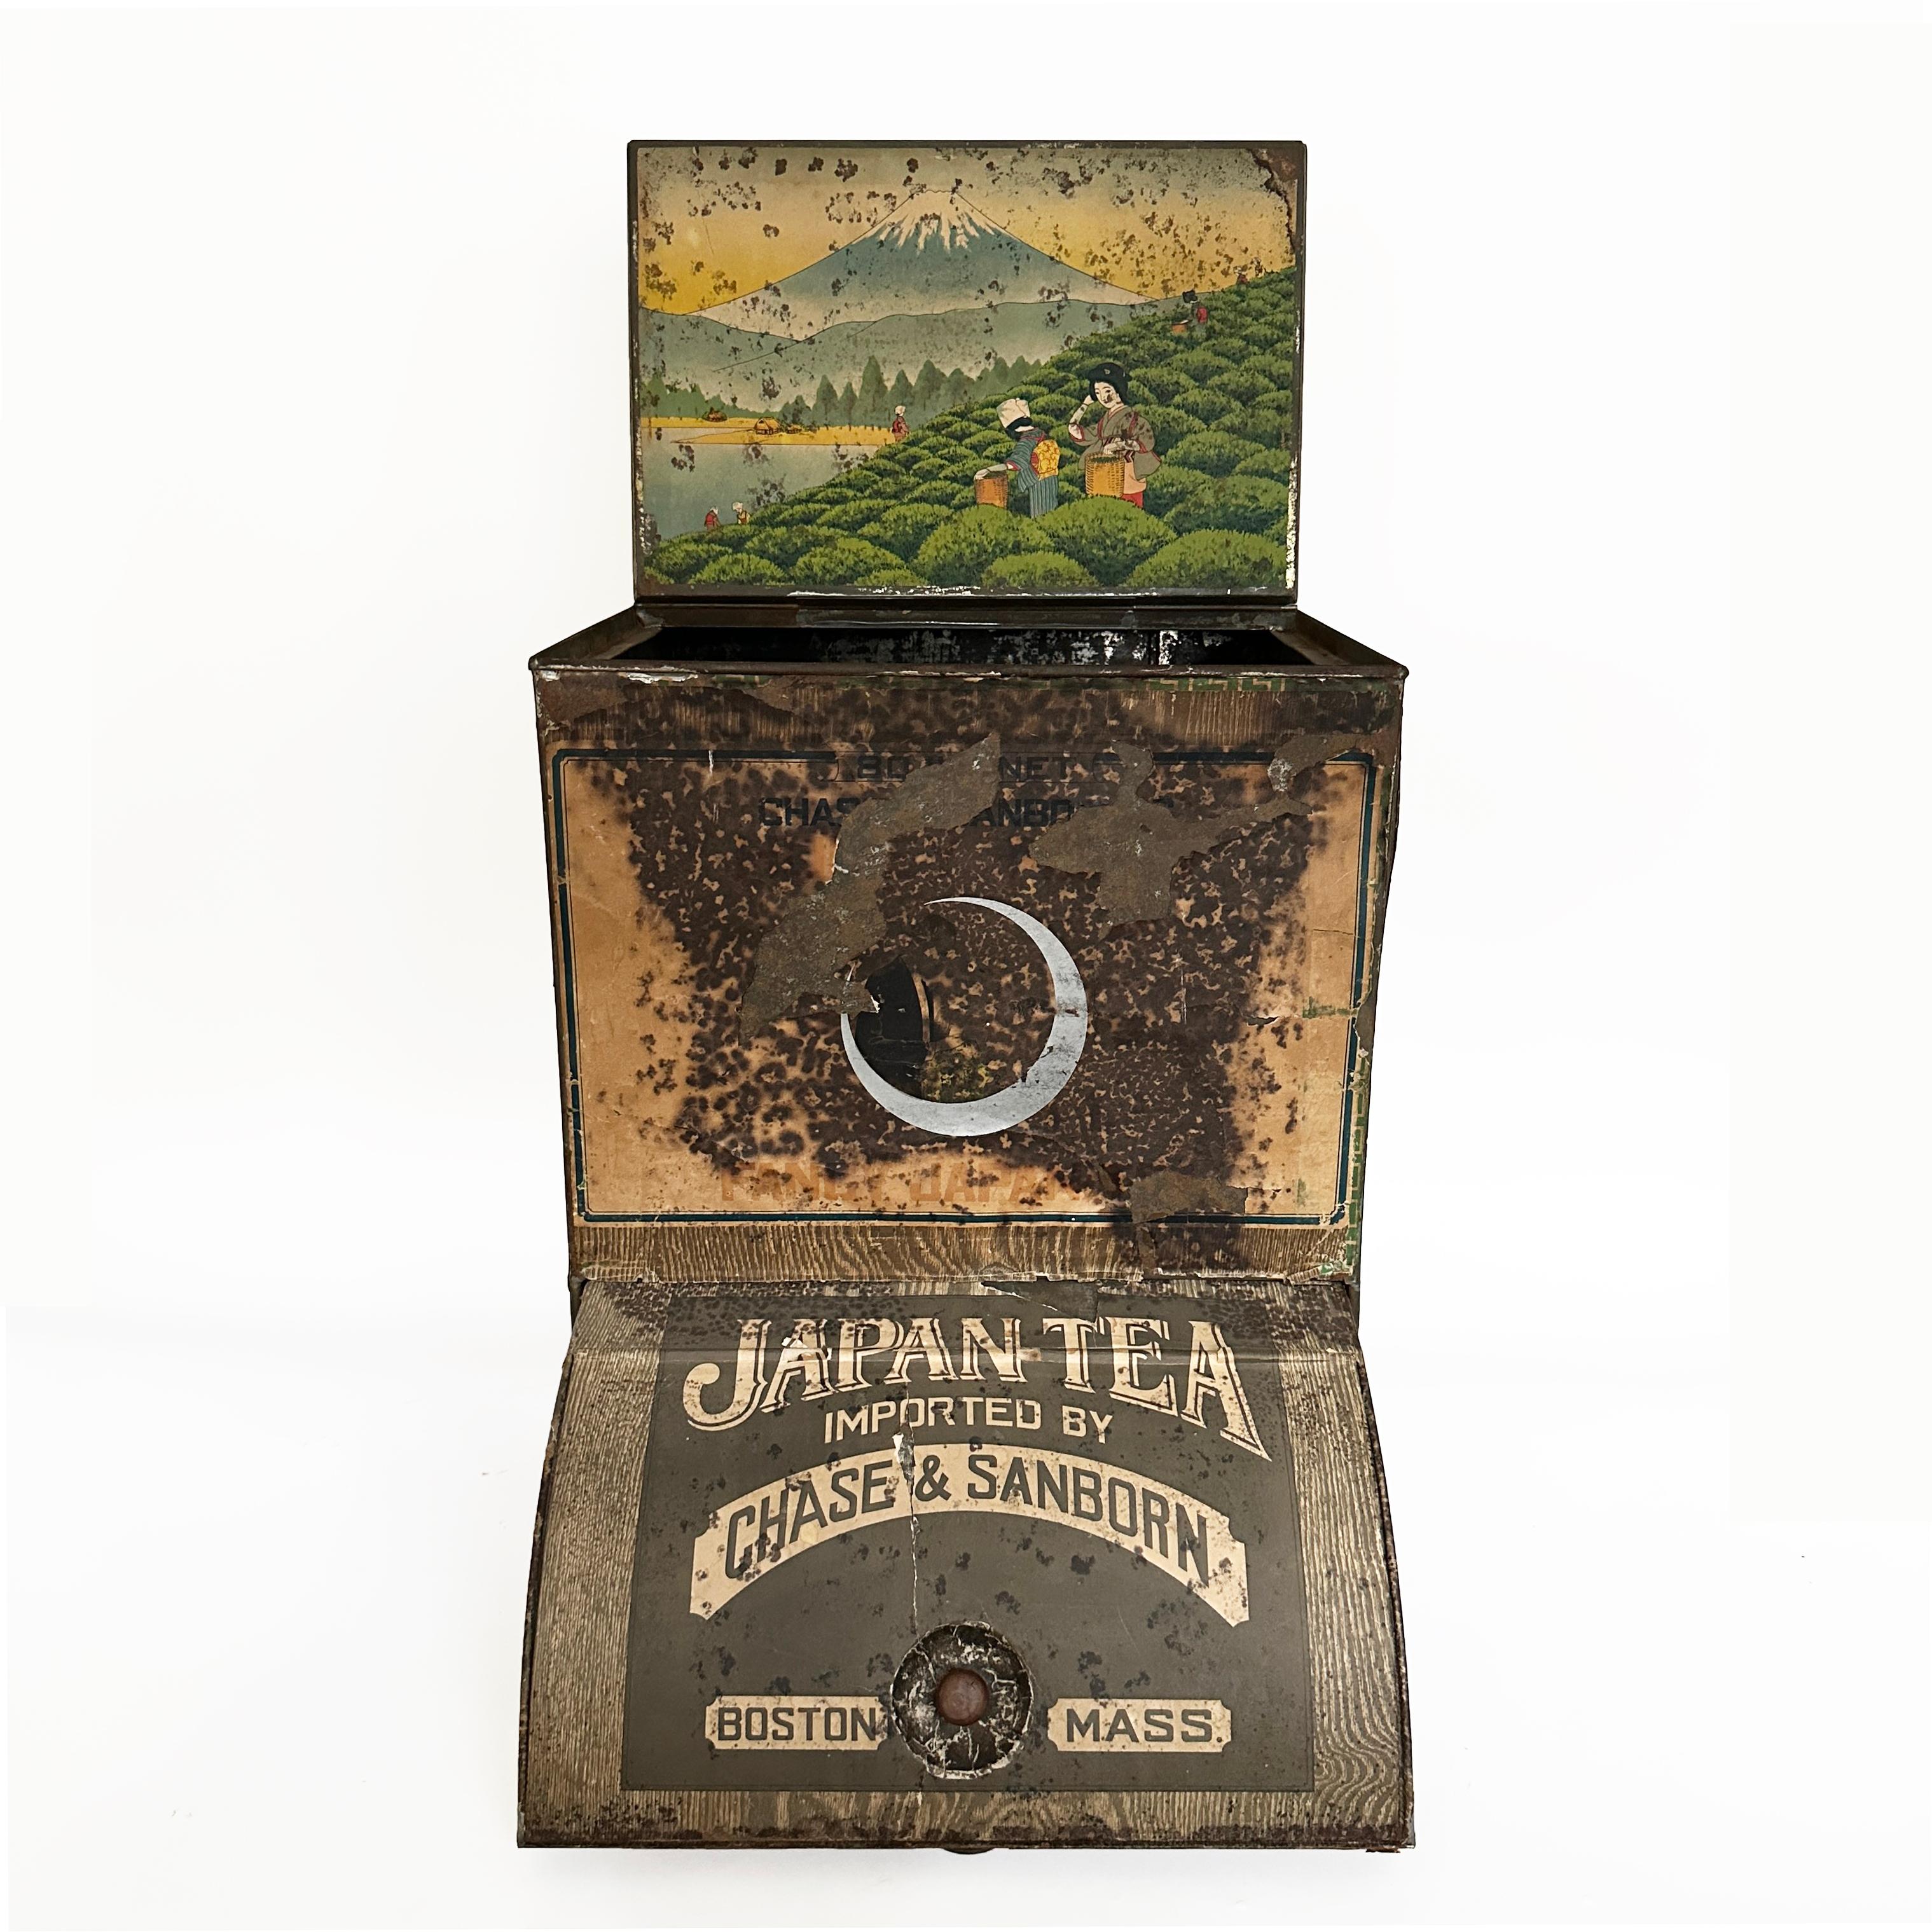 Bulk Tea container made of tin and decorated with images and symbols of an American Company named Chase and Sanborn of Boston, Massachusetts, USA.  An established coffee and tea roasting entity established in 1864, it was the first company to pack